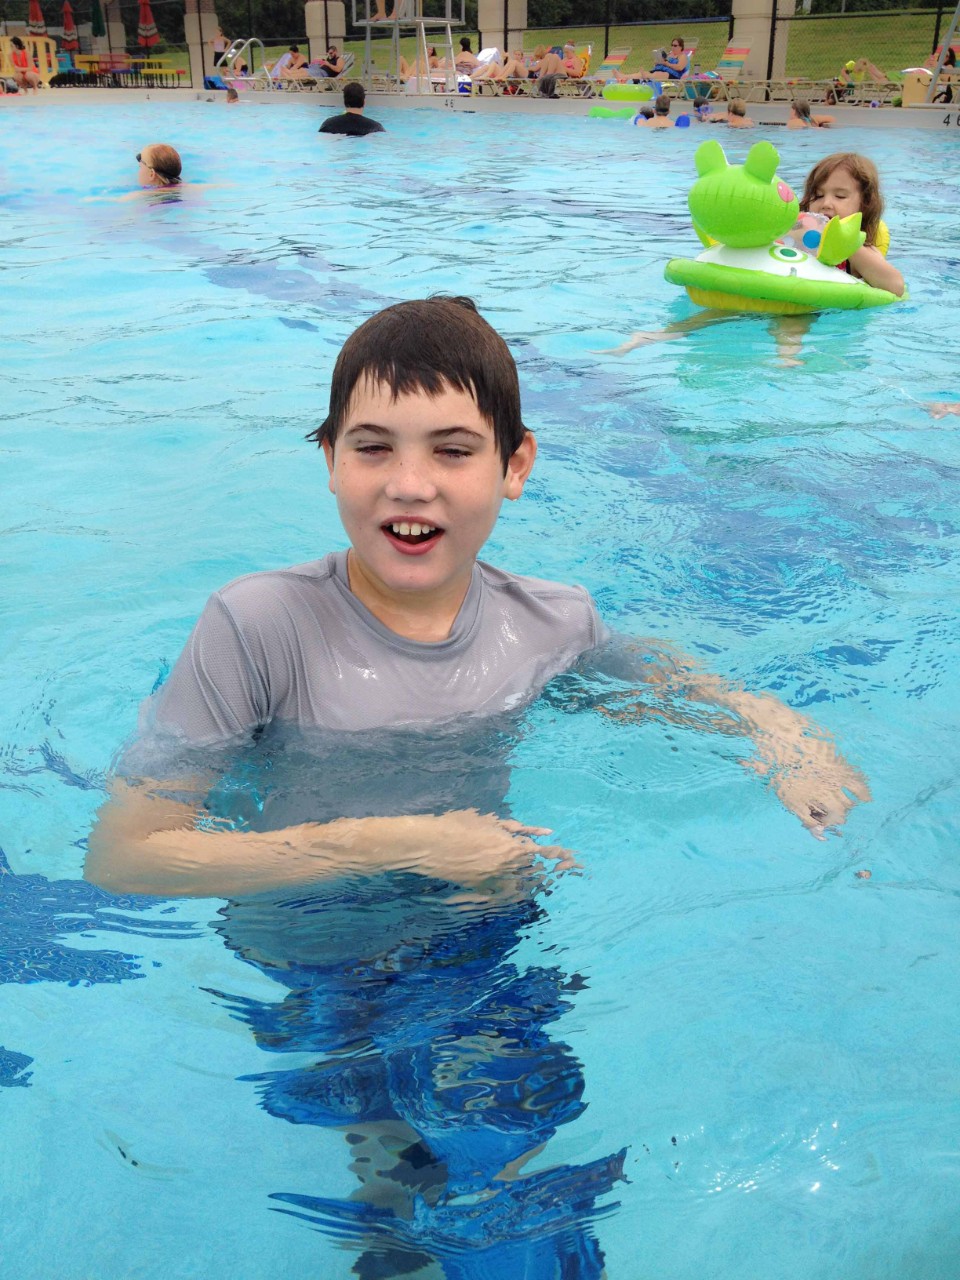 a young boy is swimming in a big public pool. He is obviously very happy to be in the water.